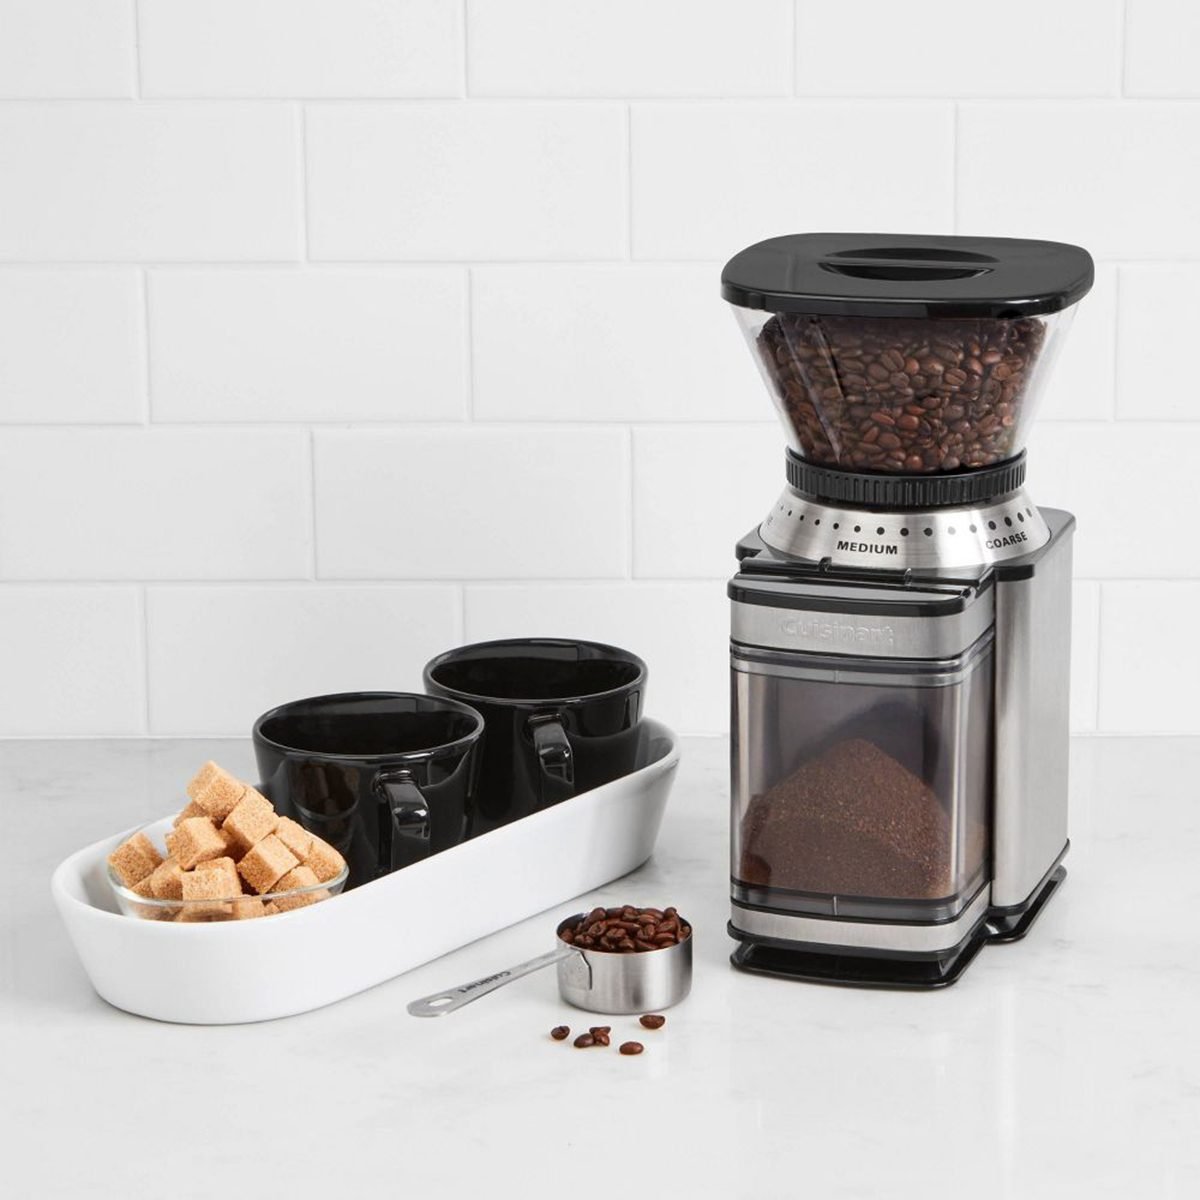 20 Best Coffee Bar Accessories for the At-Home Barista